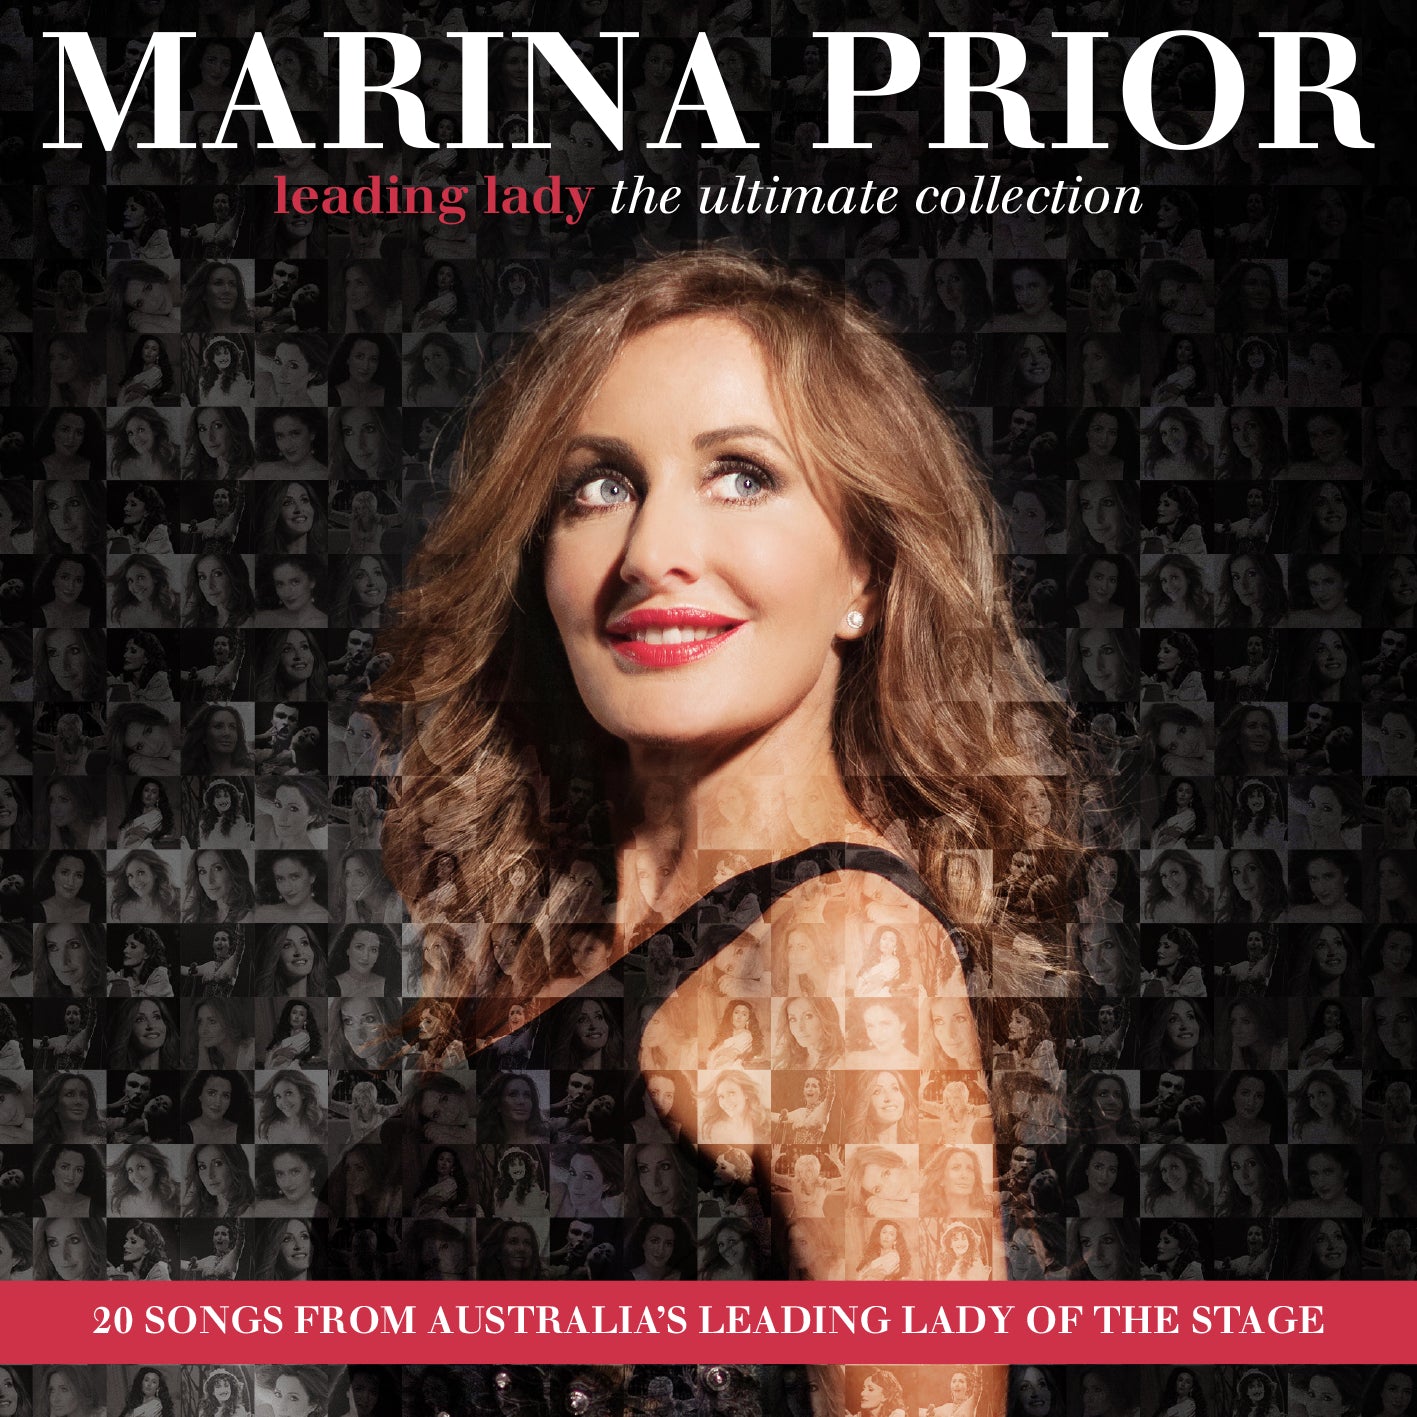 MARINA PRIOR - LEADING LADY - THE ULTIMATE COLLECTION